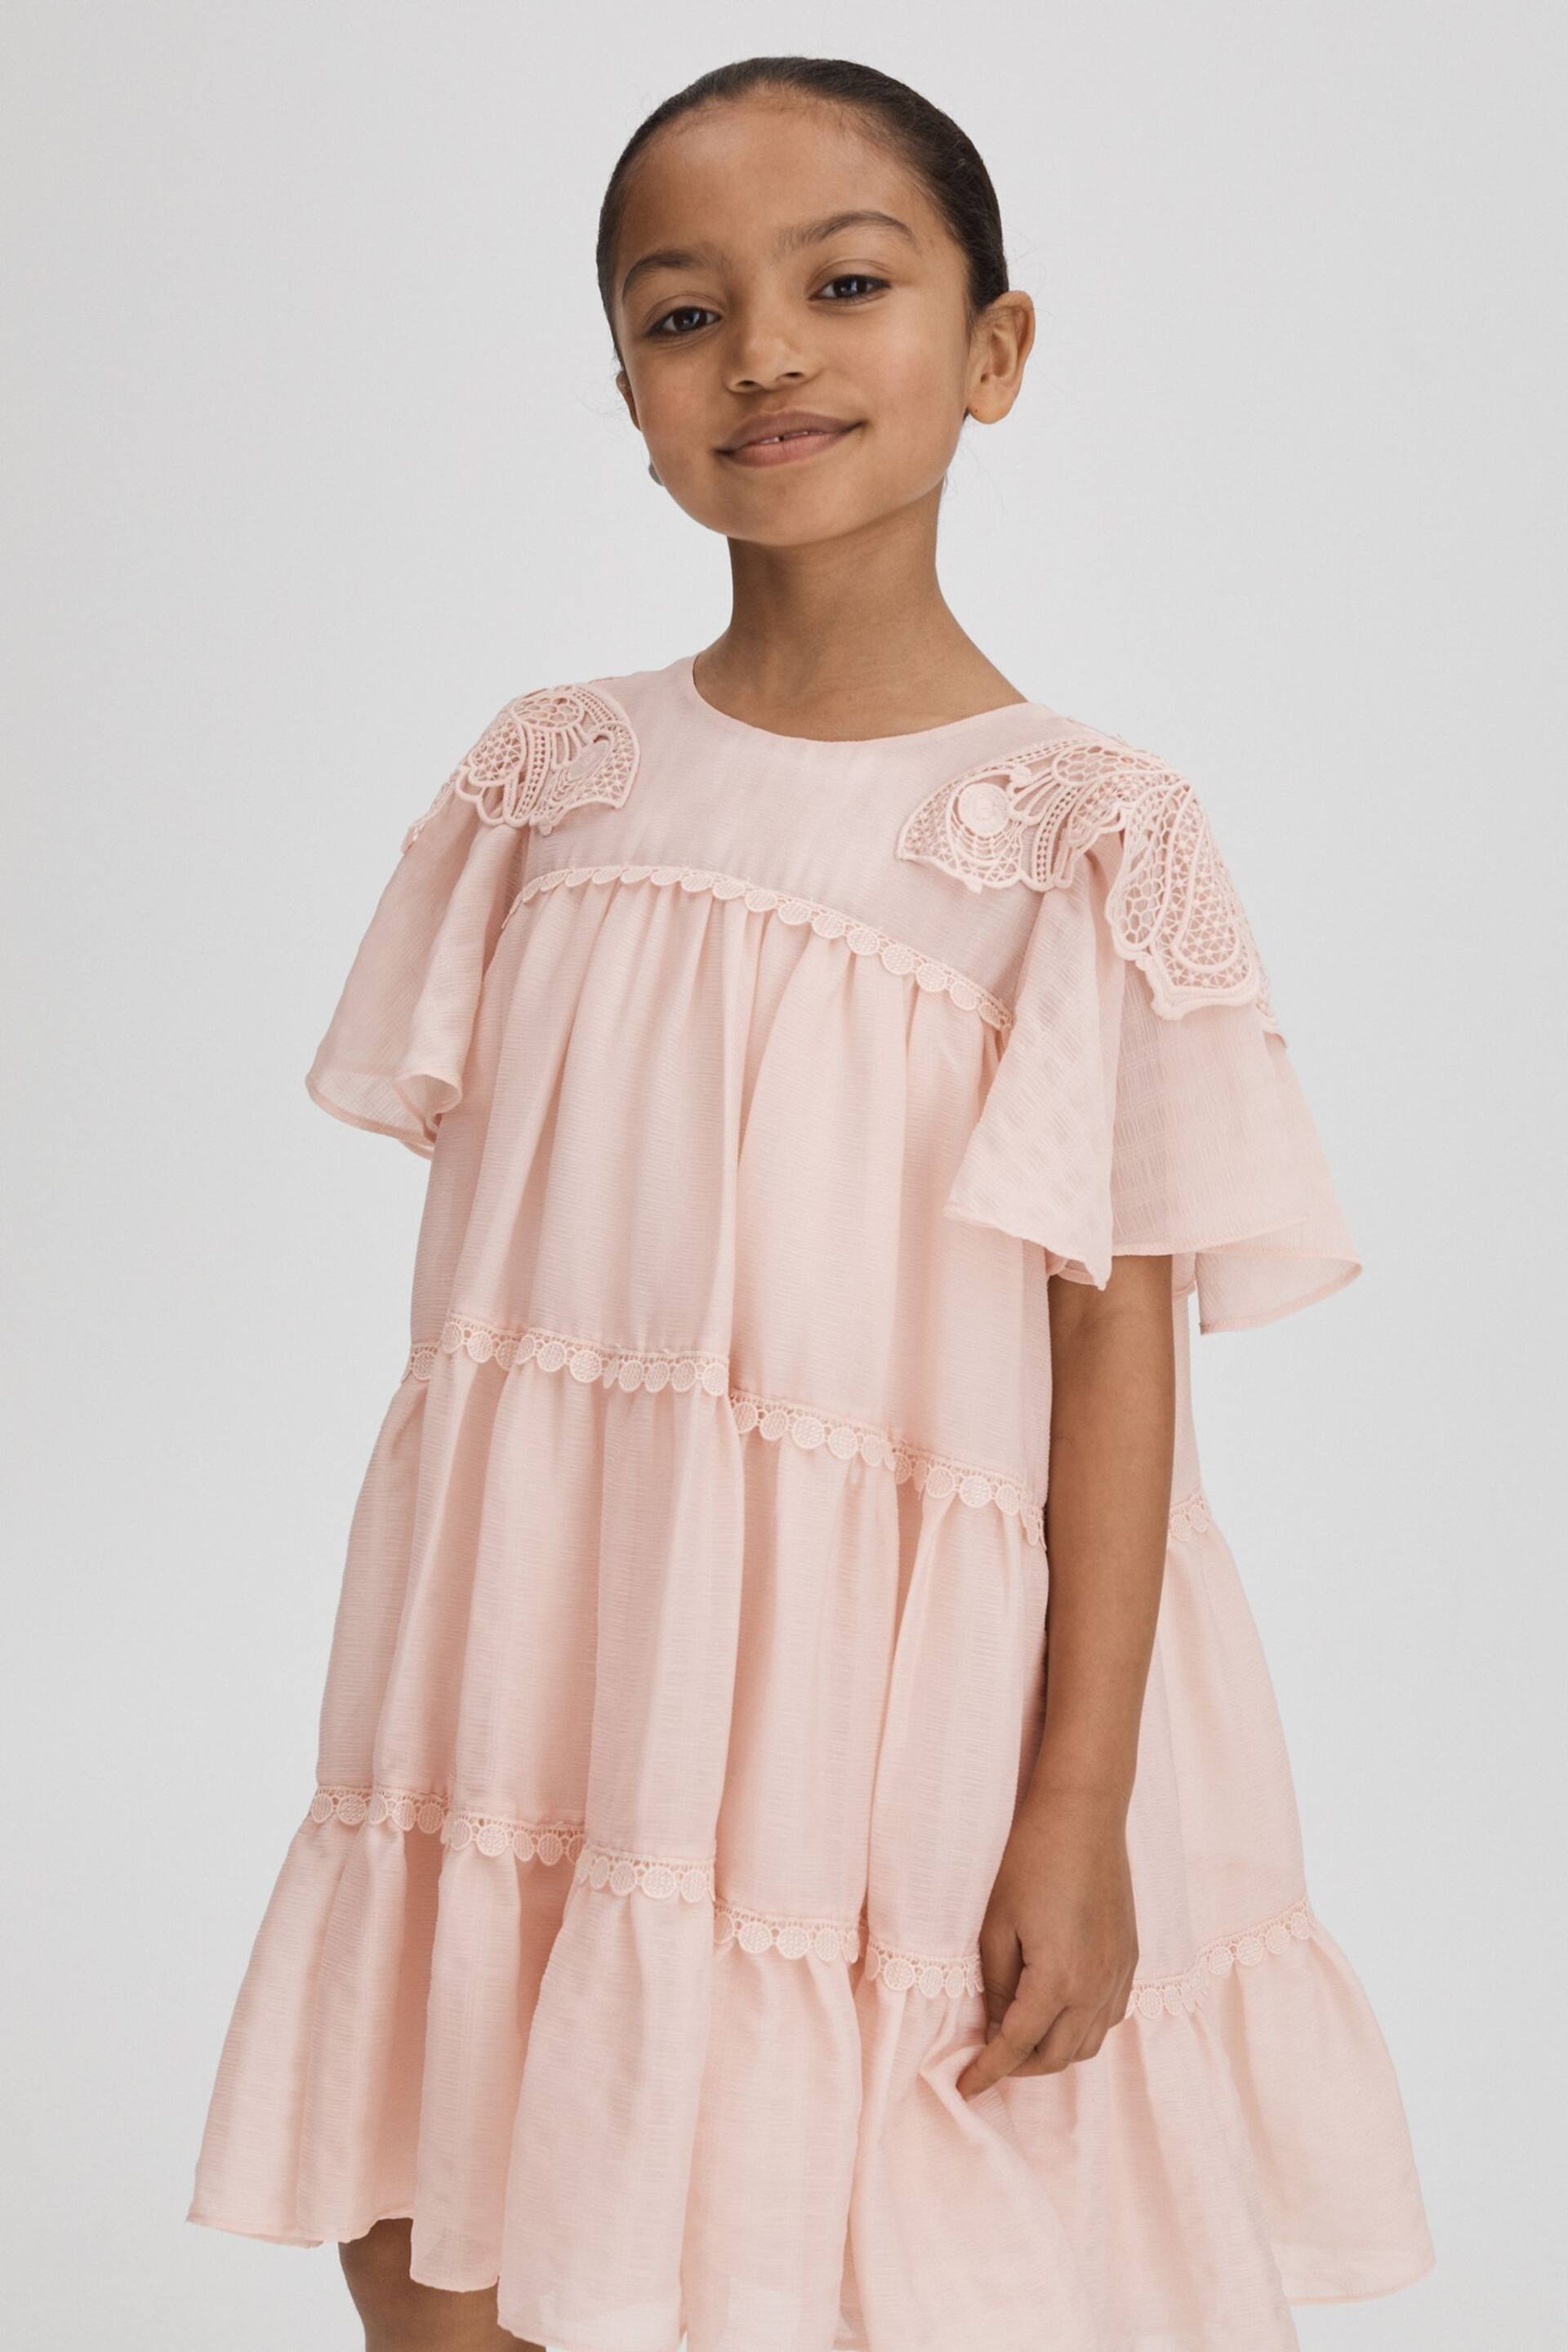 Reiss Pink Leonie Senior Tiered Embroidered Dress - Image 1 of 6